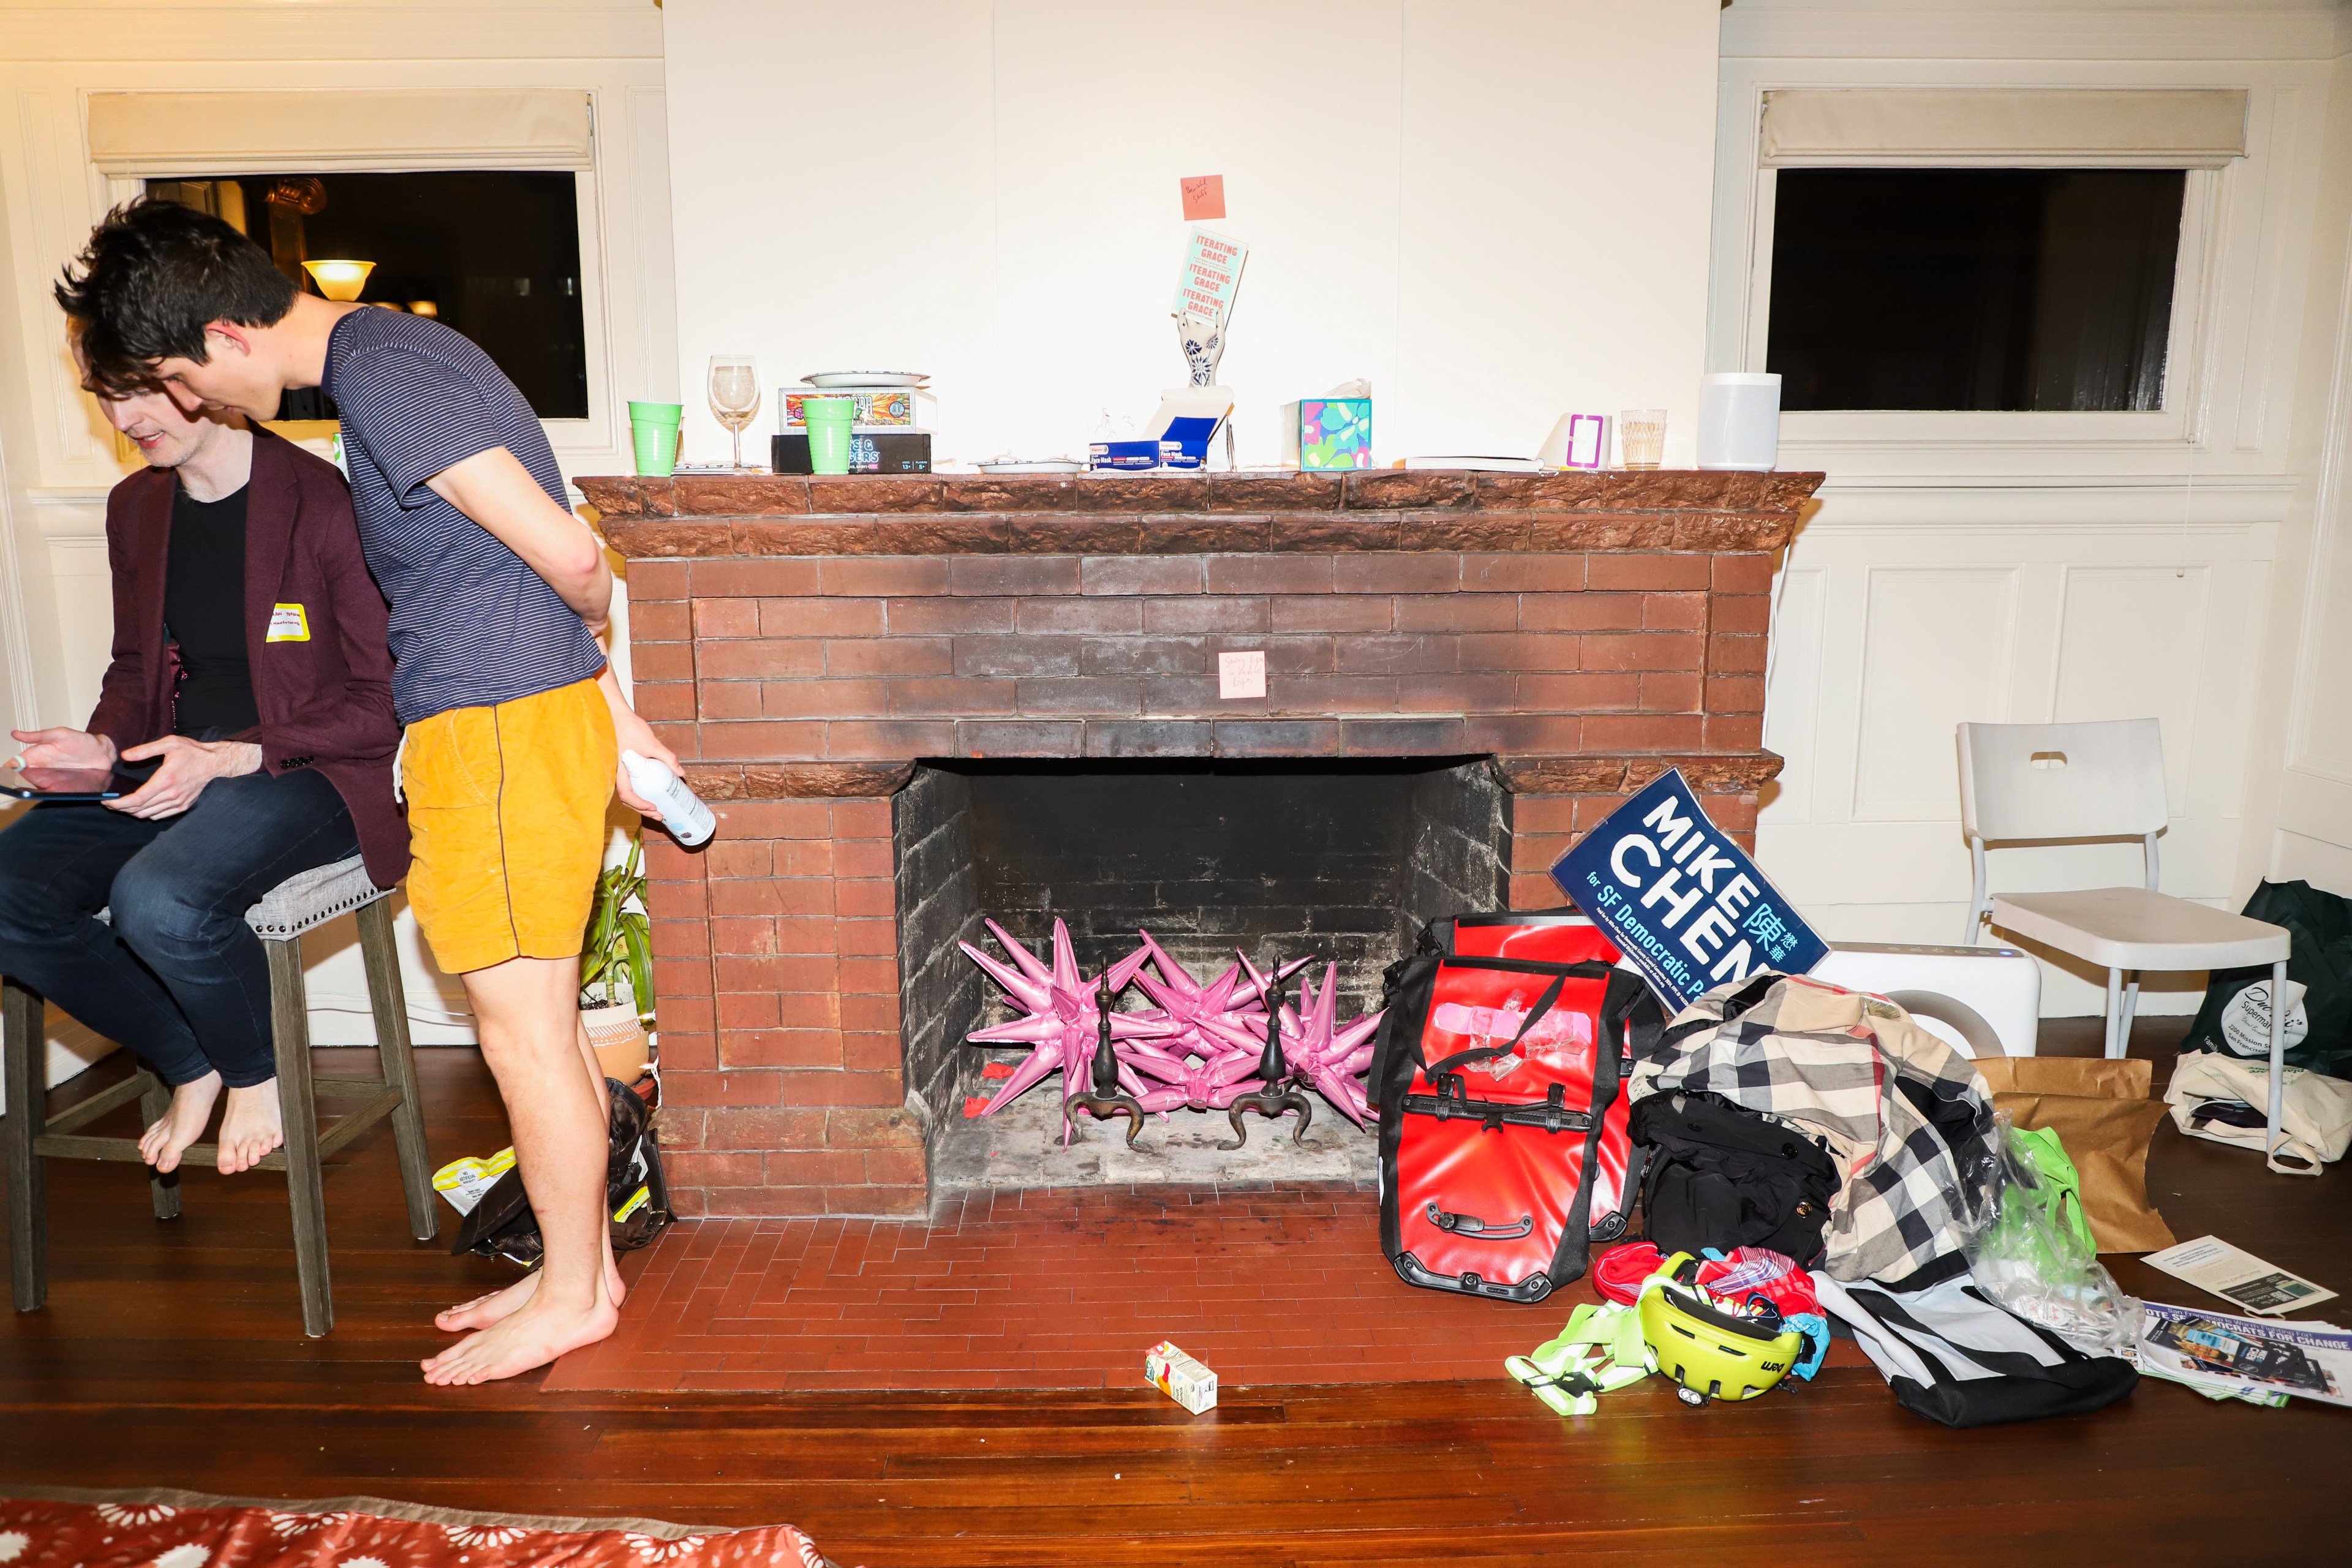 Scattered personal belongings and a Mike Chen campaign sign sit in front of a brink fireplace in a cluttered room with two individuals.